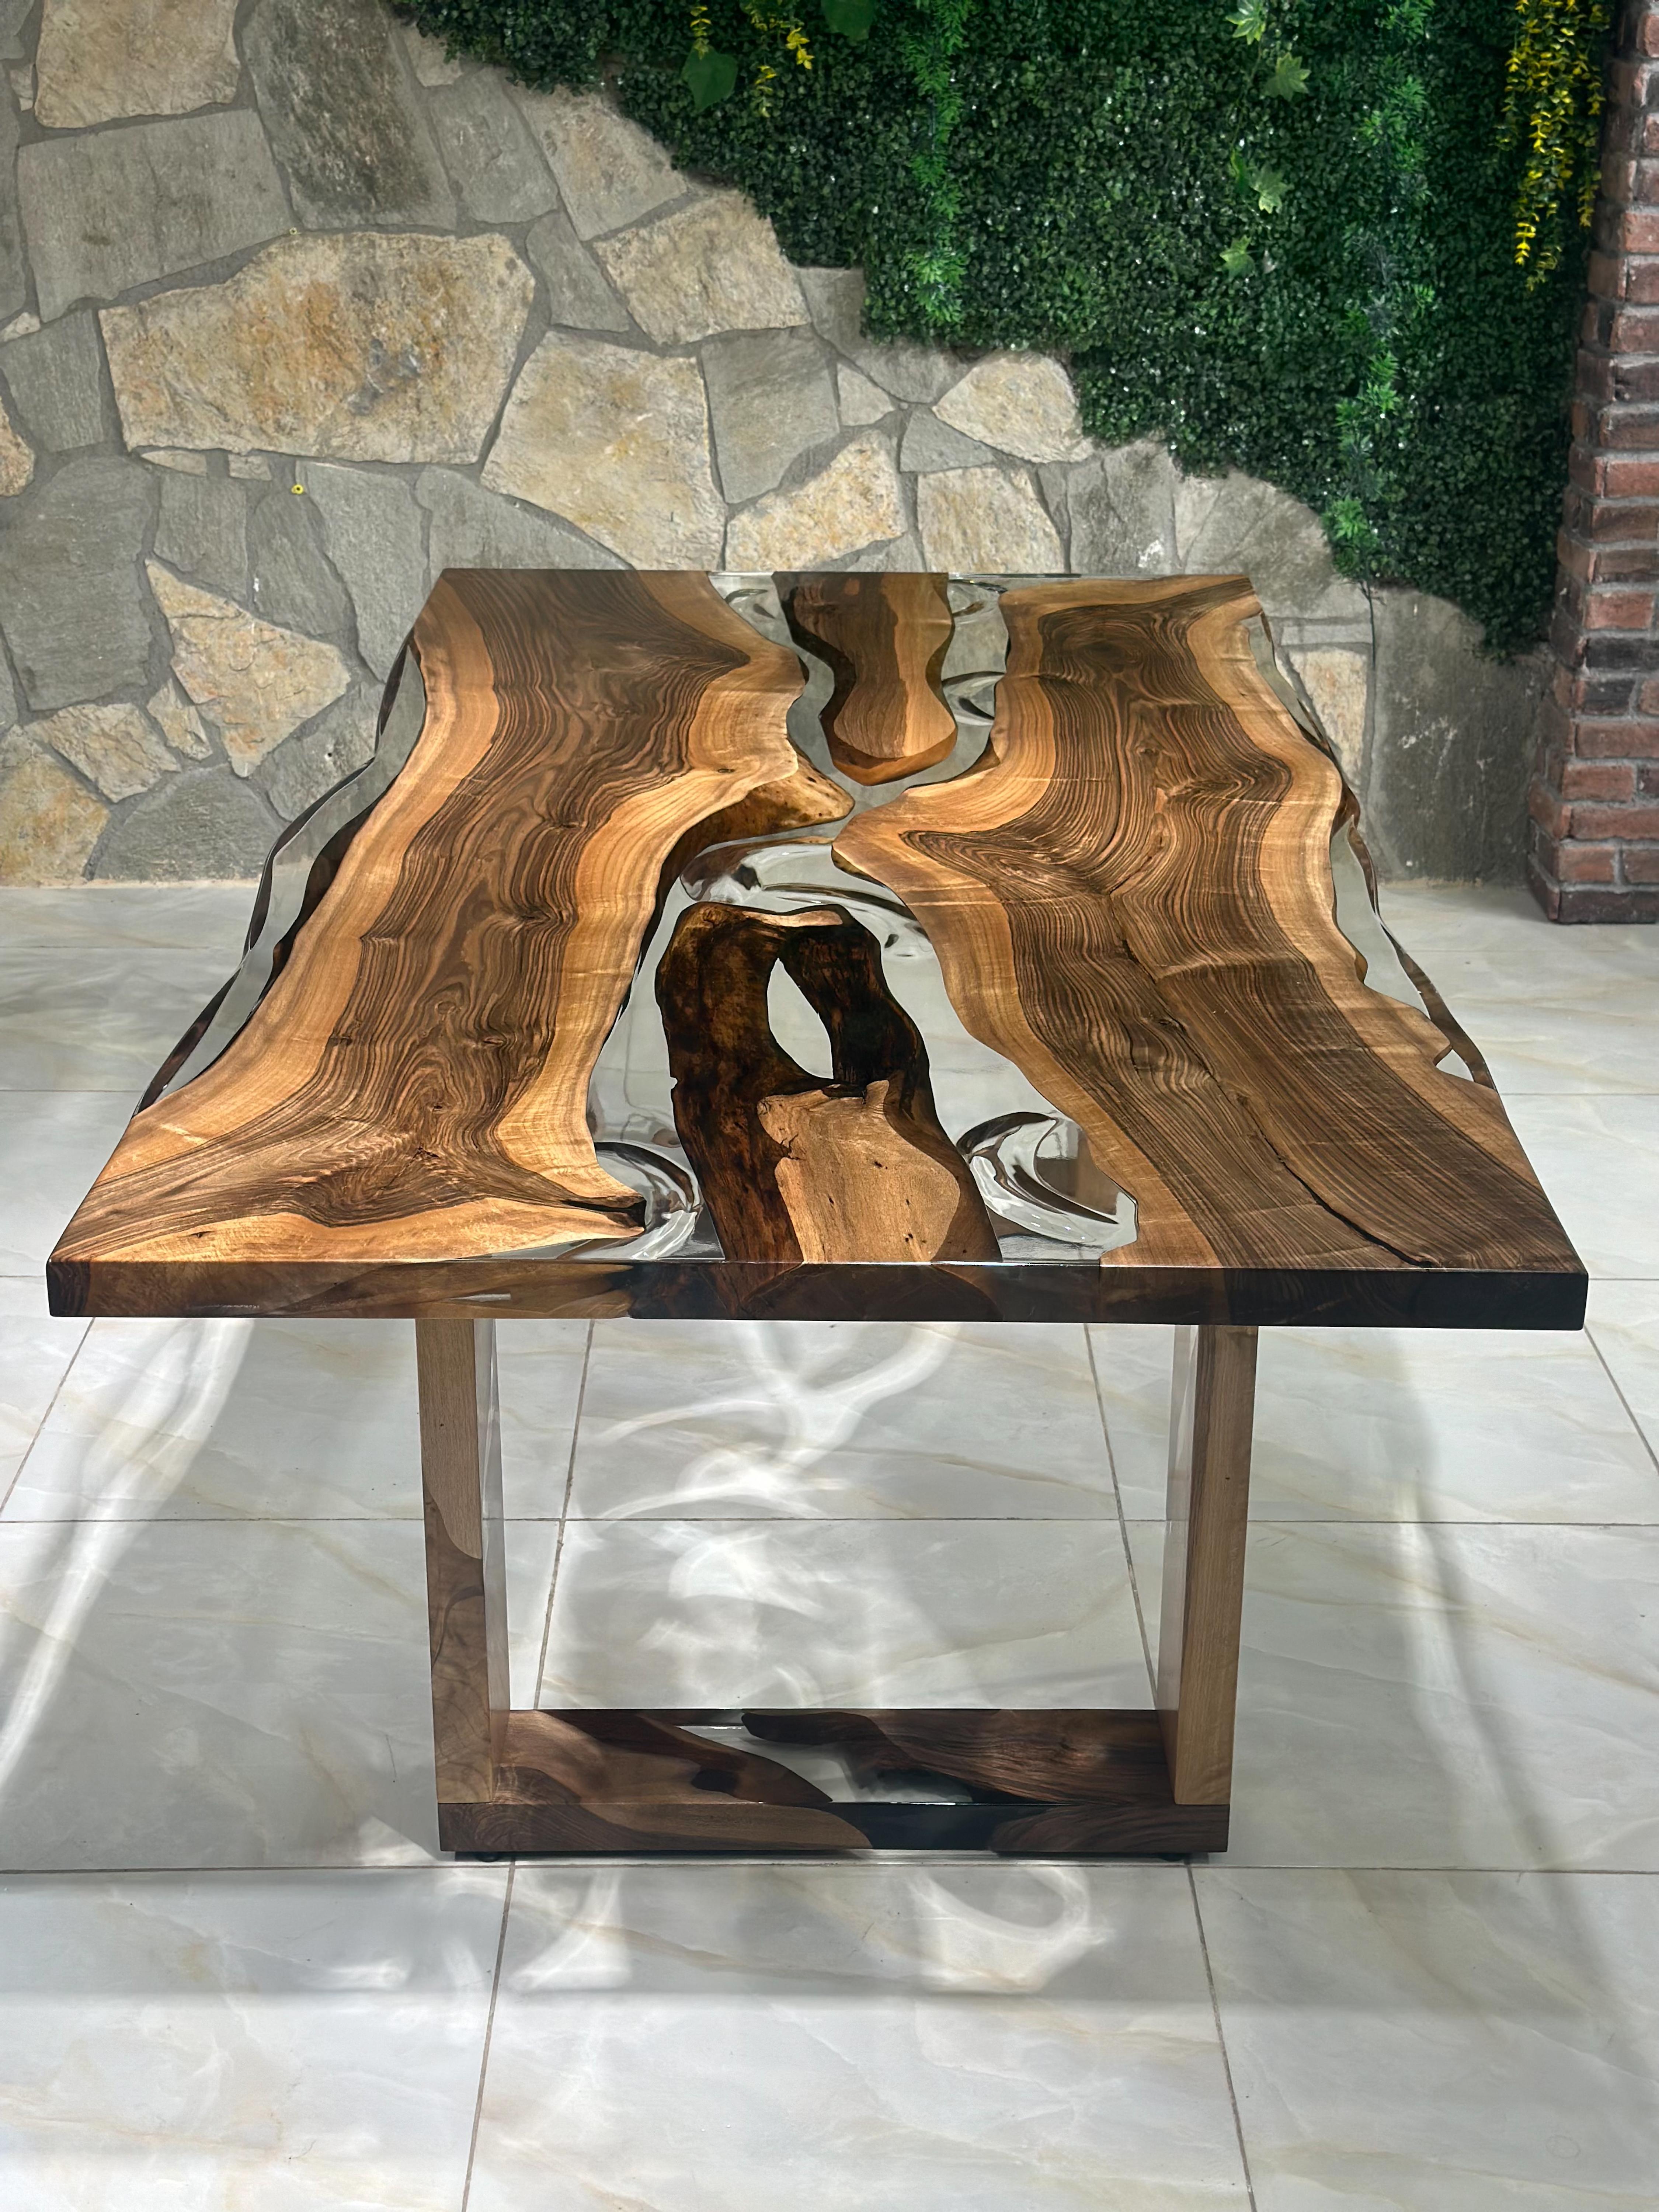 Walnut Wood and Clear Epoxy Table - Custom sizes are available!

This table seamlessly combines the warmth of walnut wood with the modern touch of clear epoxy. It’s a beautiful centerpiece for any room.

Features:

Materials: The tabletop showcases